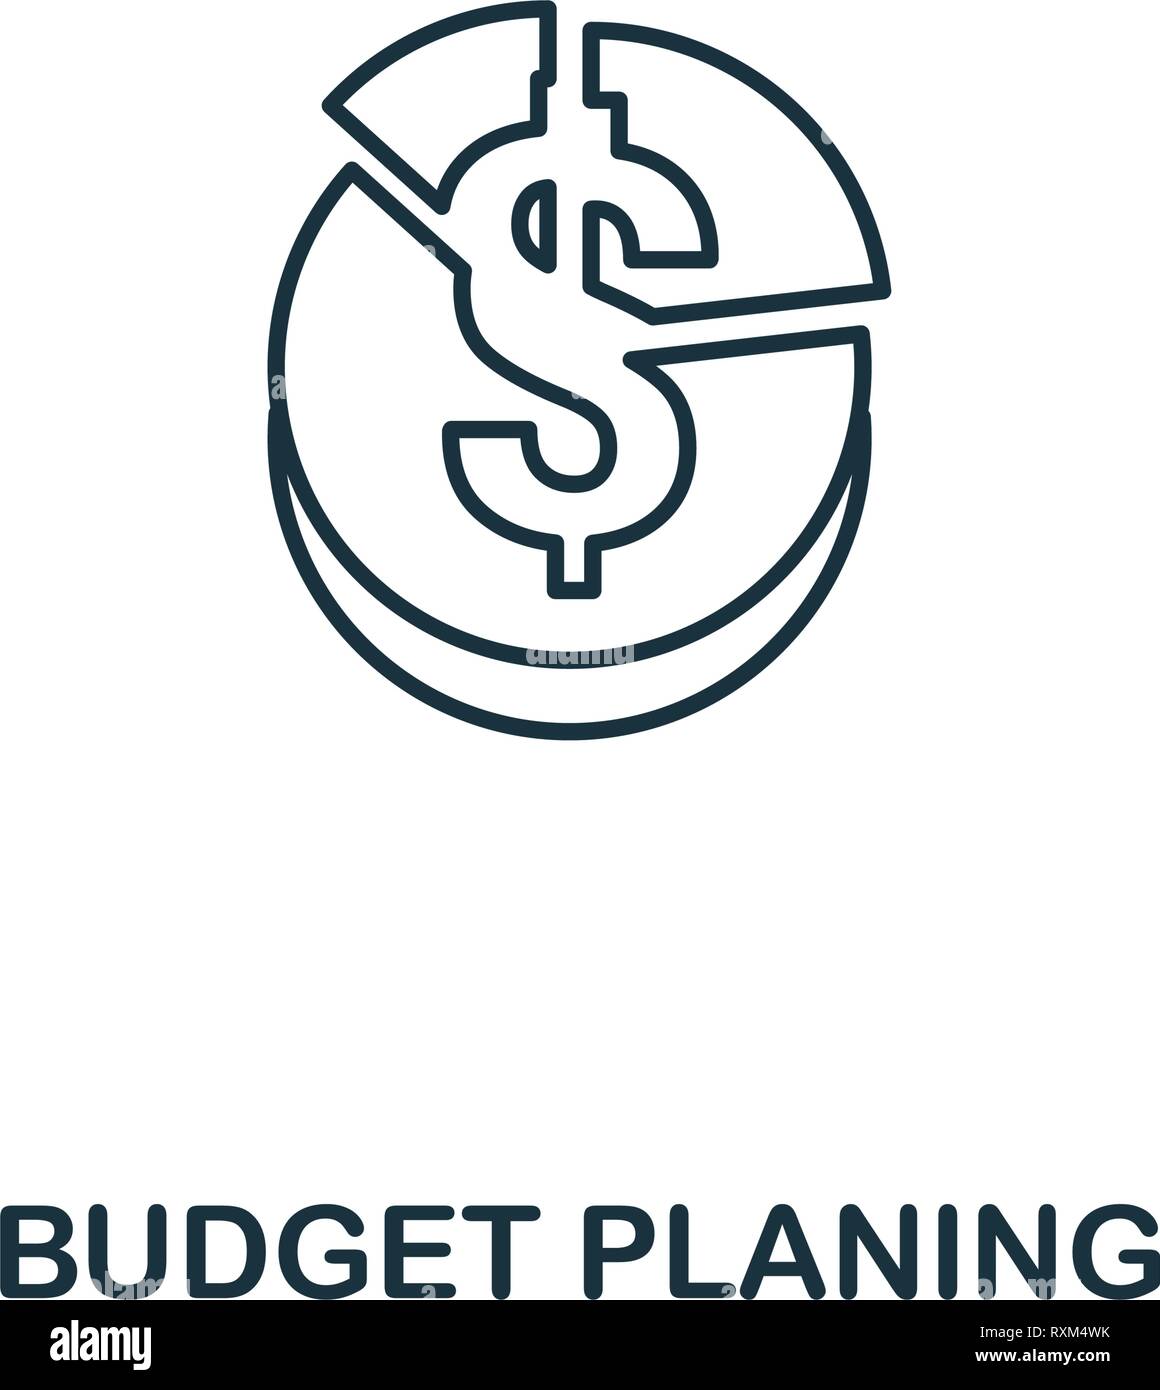 Budget Planing icon thin line style. Symbol from online marketing icons collection. Outline budget planing icon for web design, apps, software Stock Vector